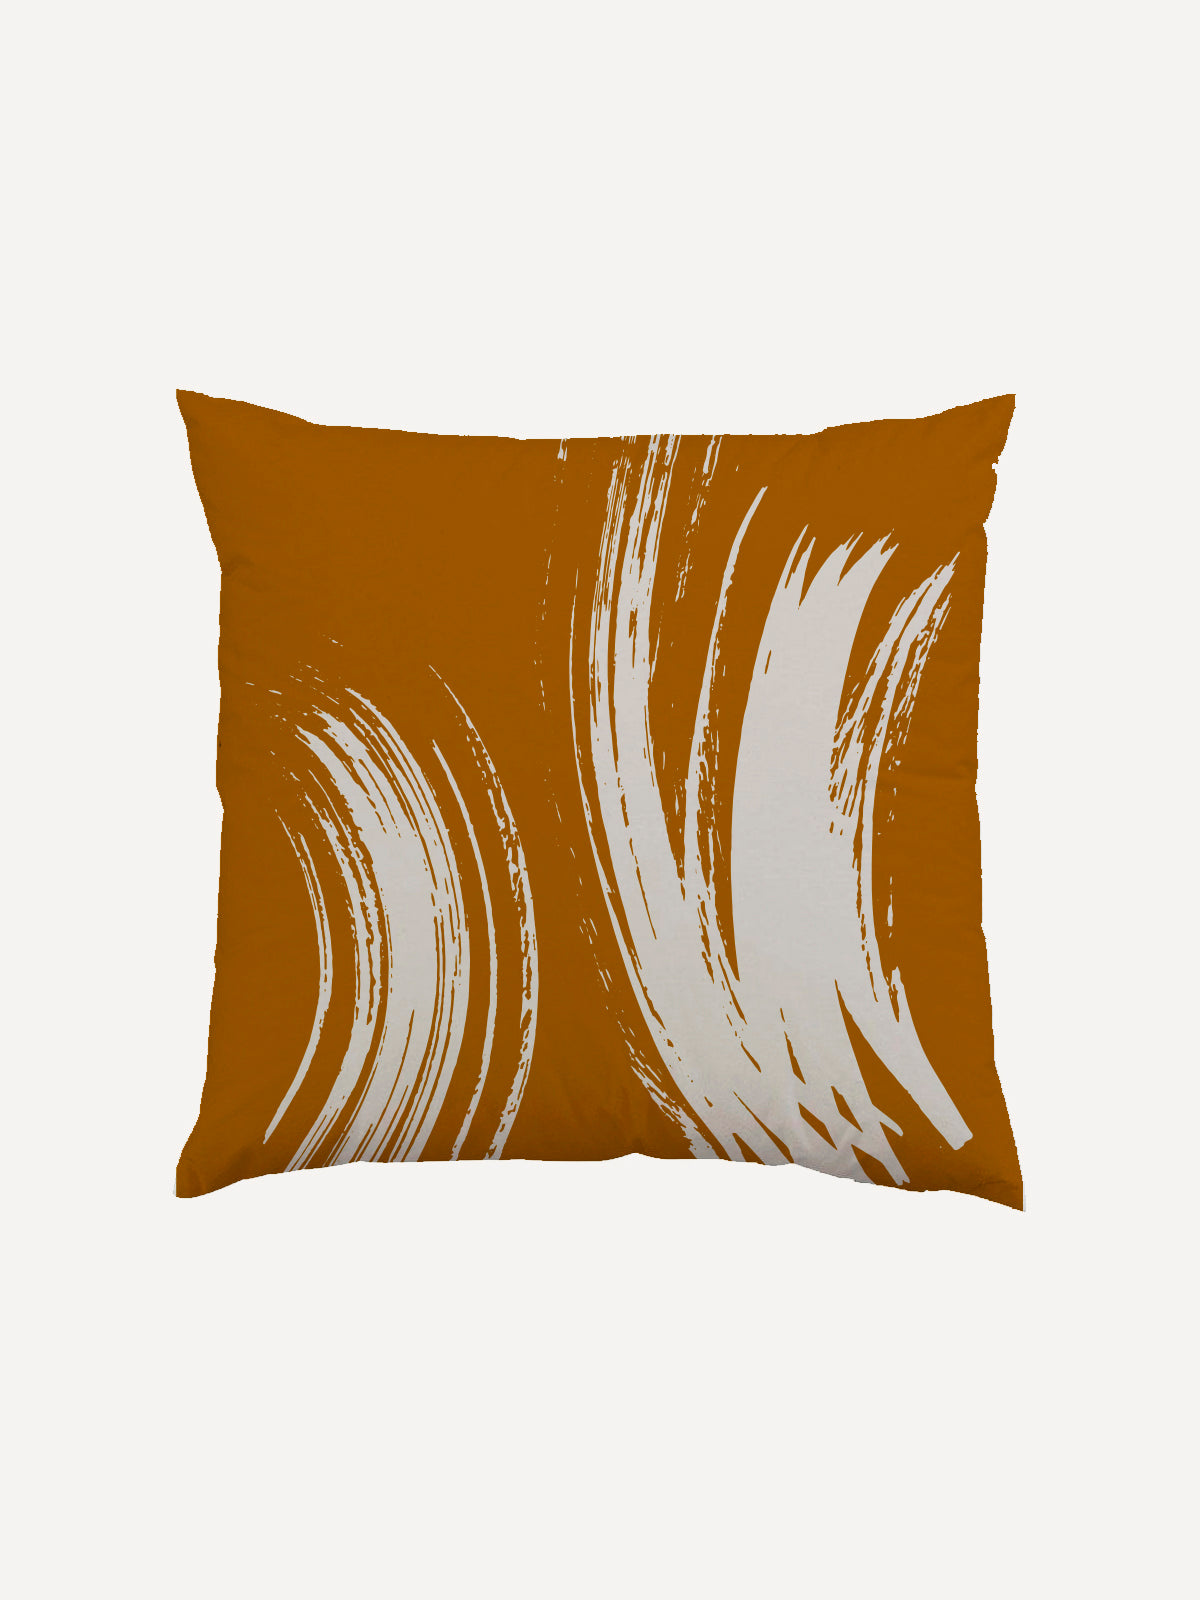 Mustard colored brush stroke cushion cover